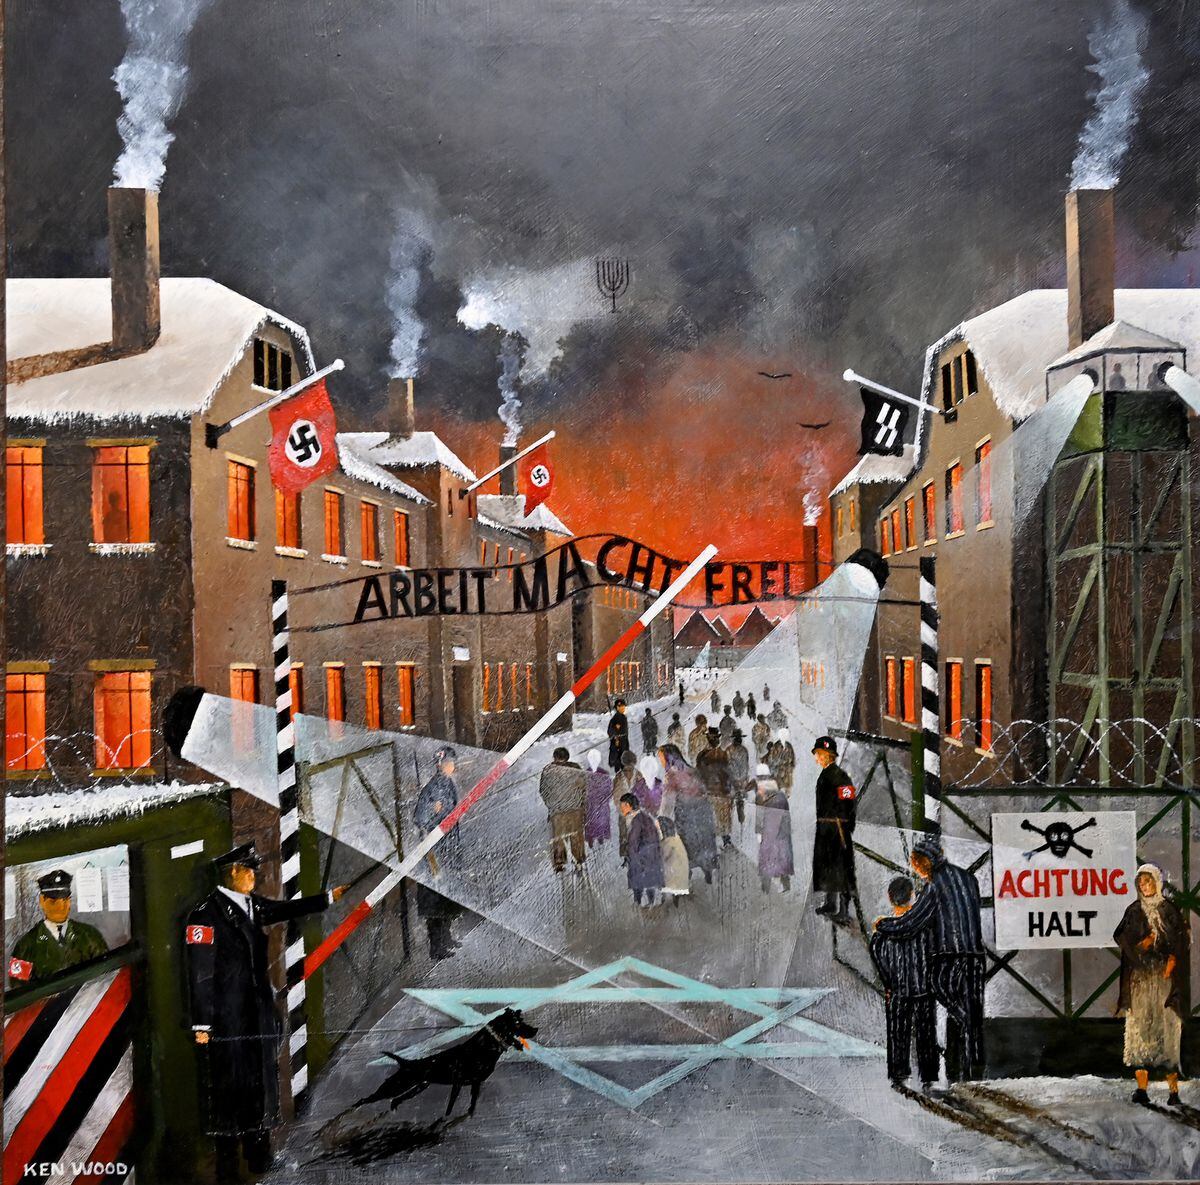 Ken Wood has also painted a concentration camp scene